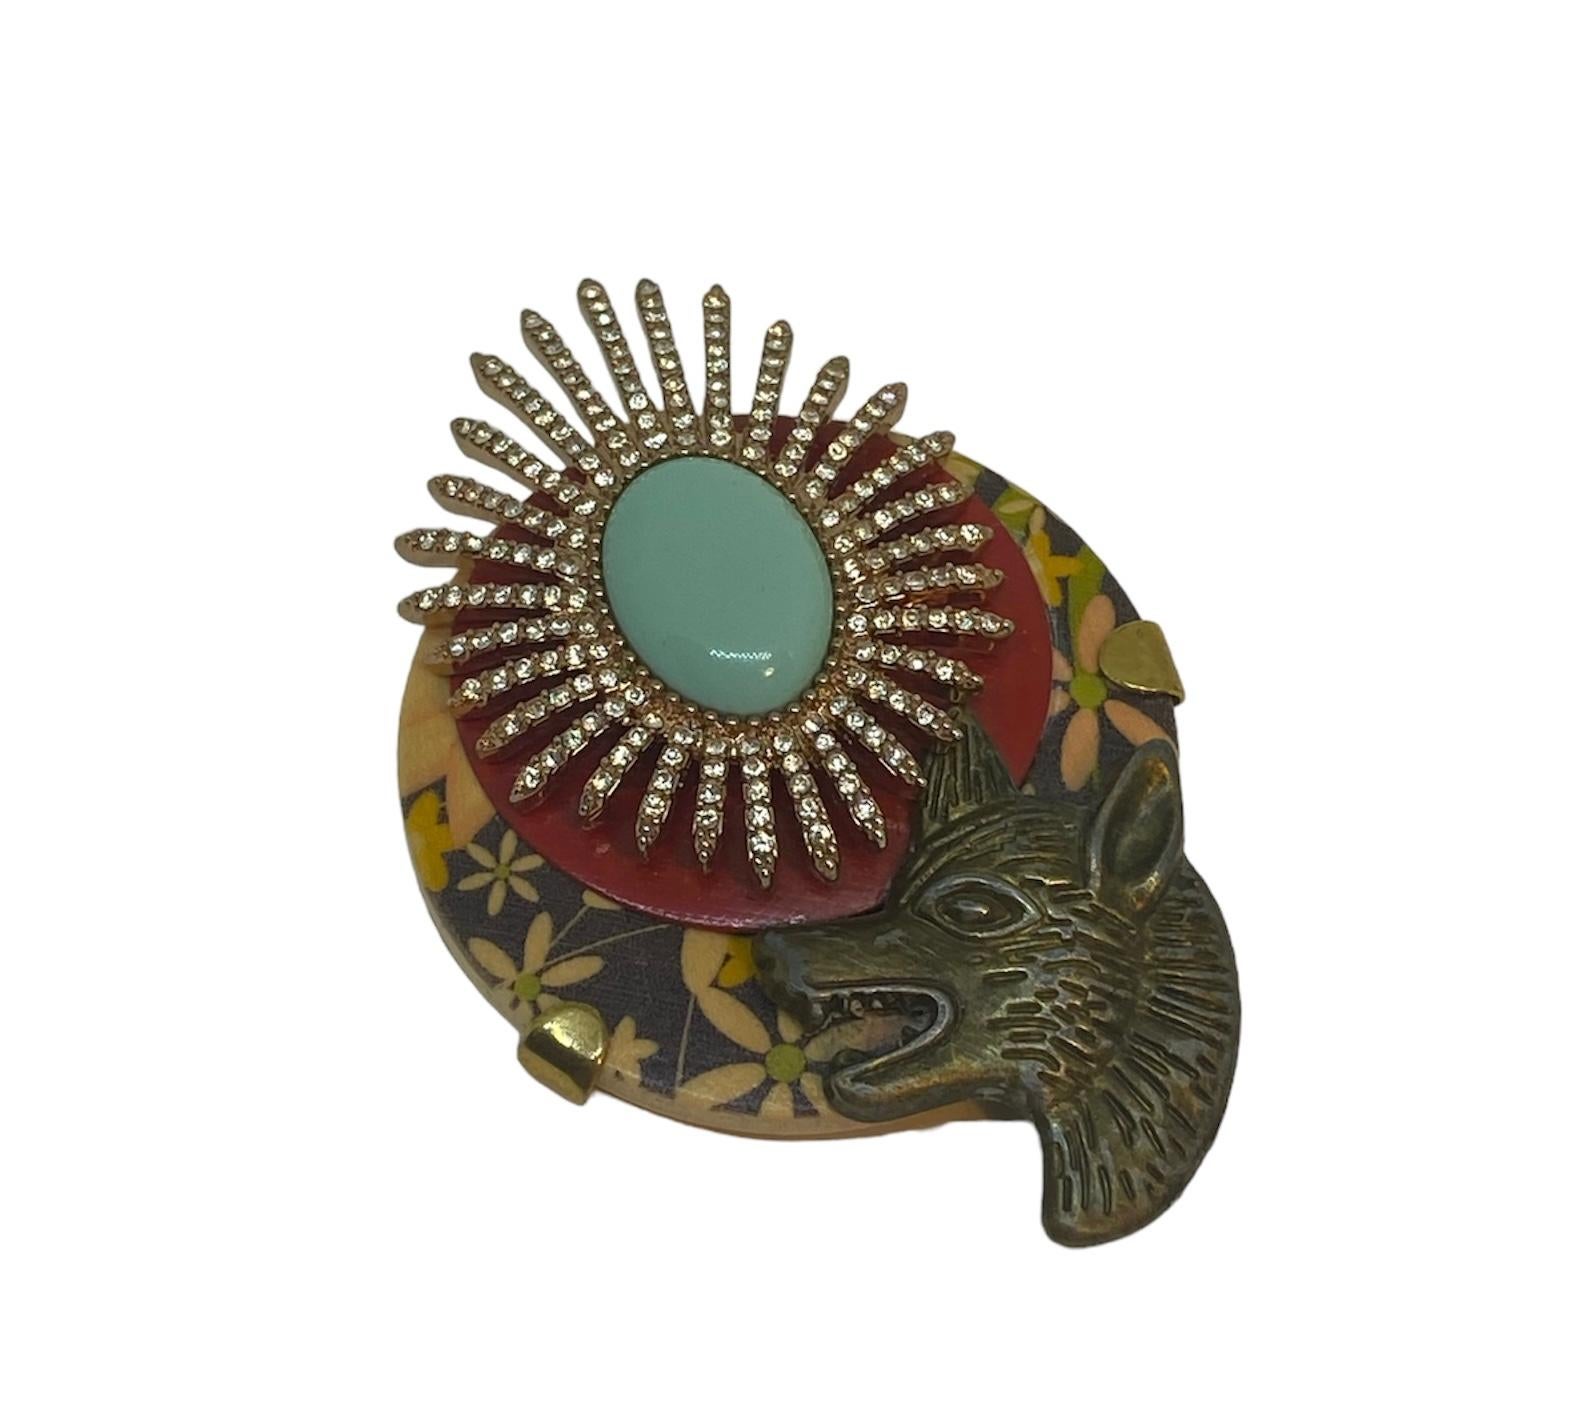 This brooch is a unique piece created for Ludmila Navarro, fine artist & jewellery designer. A totally handmade jewel which it was created from a sustainable process during which she recovers and improves several antique and vintage jewels and